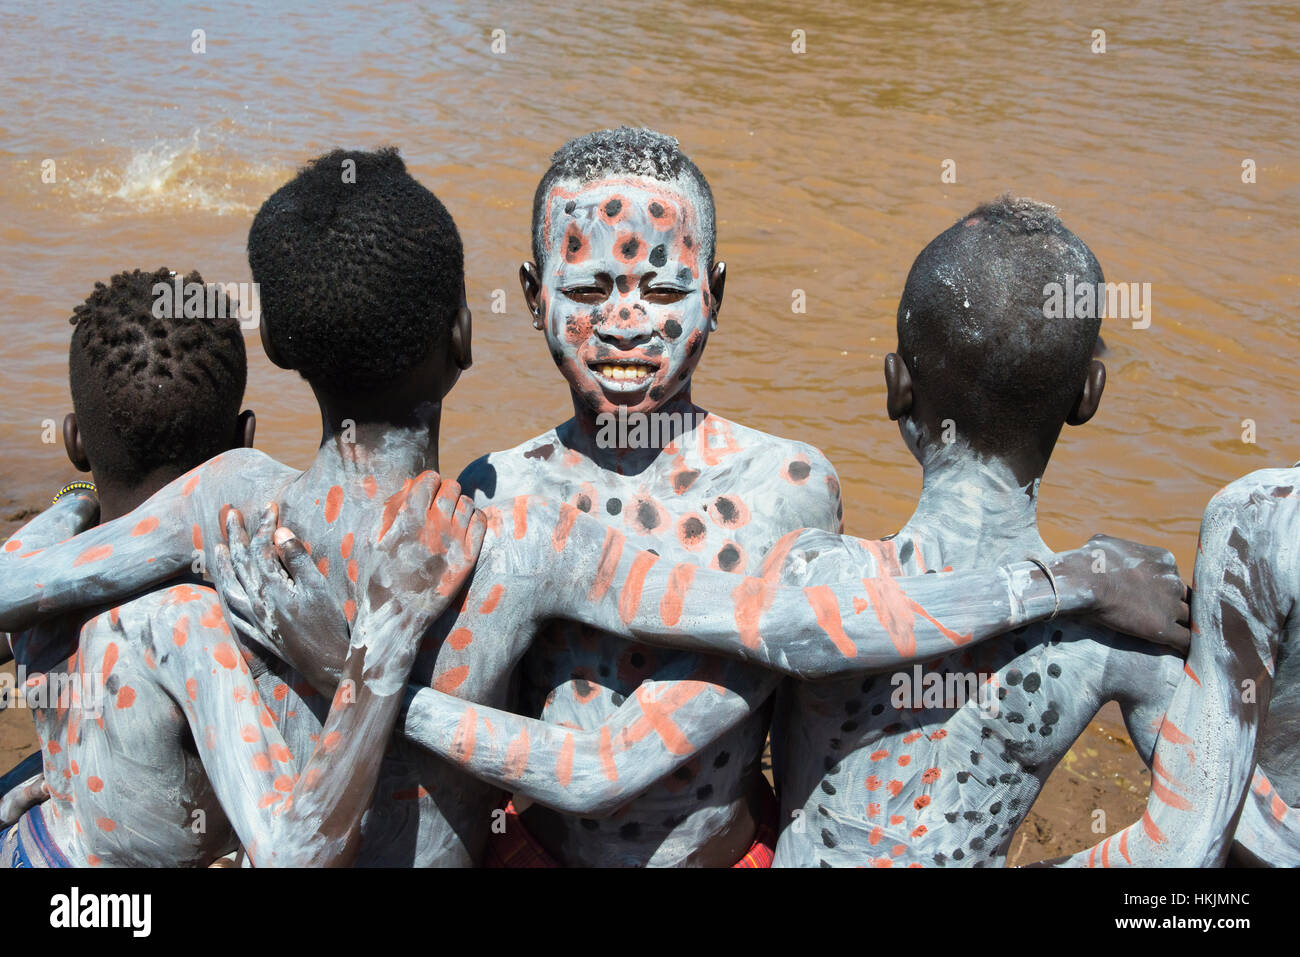 Kara tribe boy with painted face and body by Lower Omo River, South Omo, Ethiopia Stock Photo